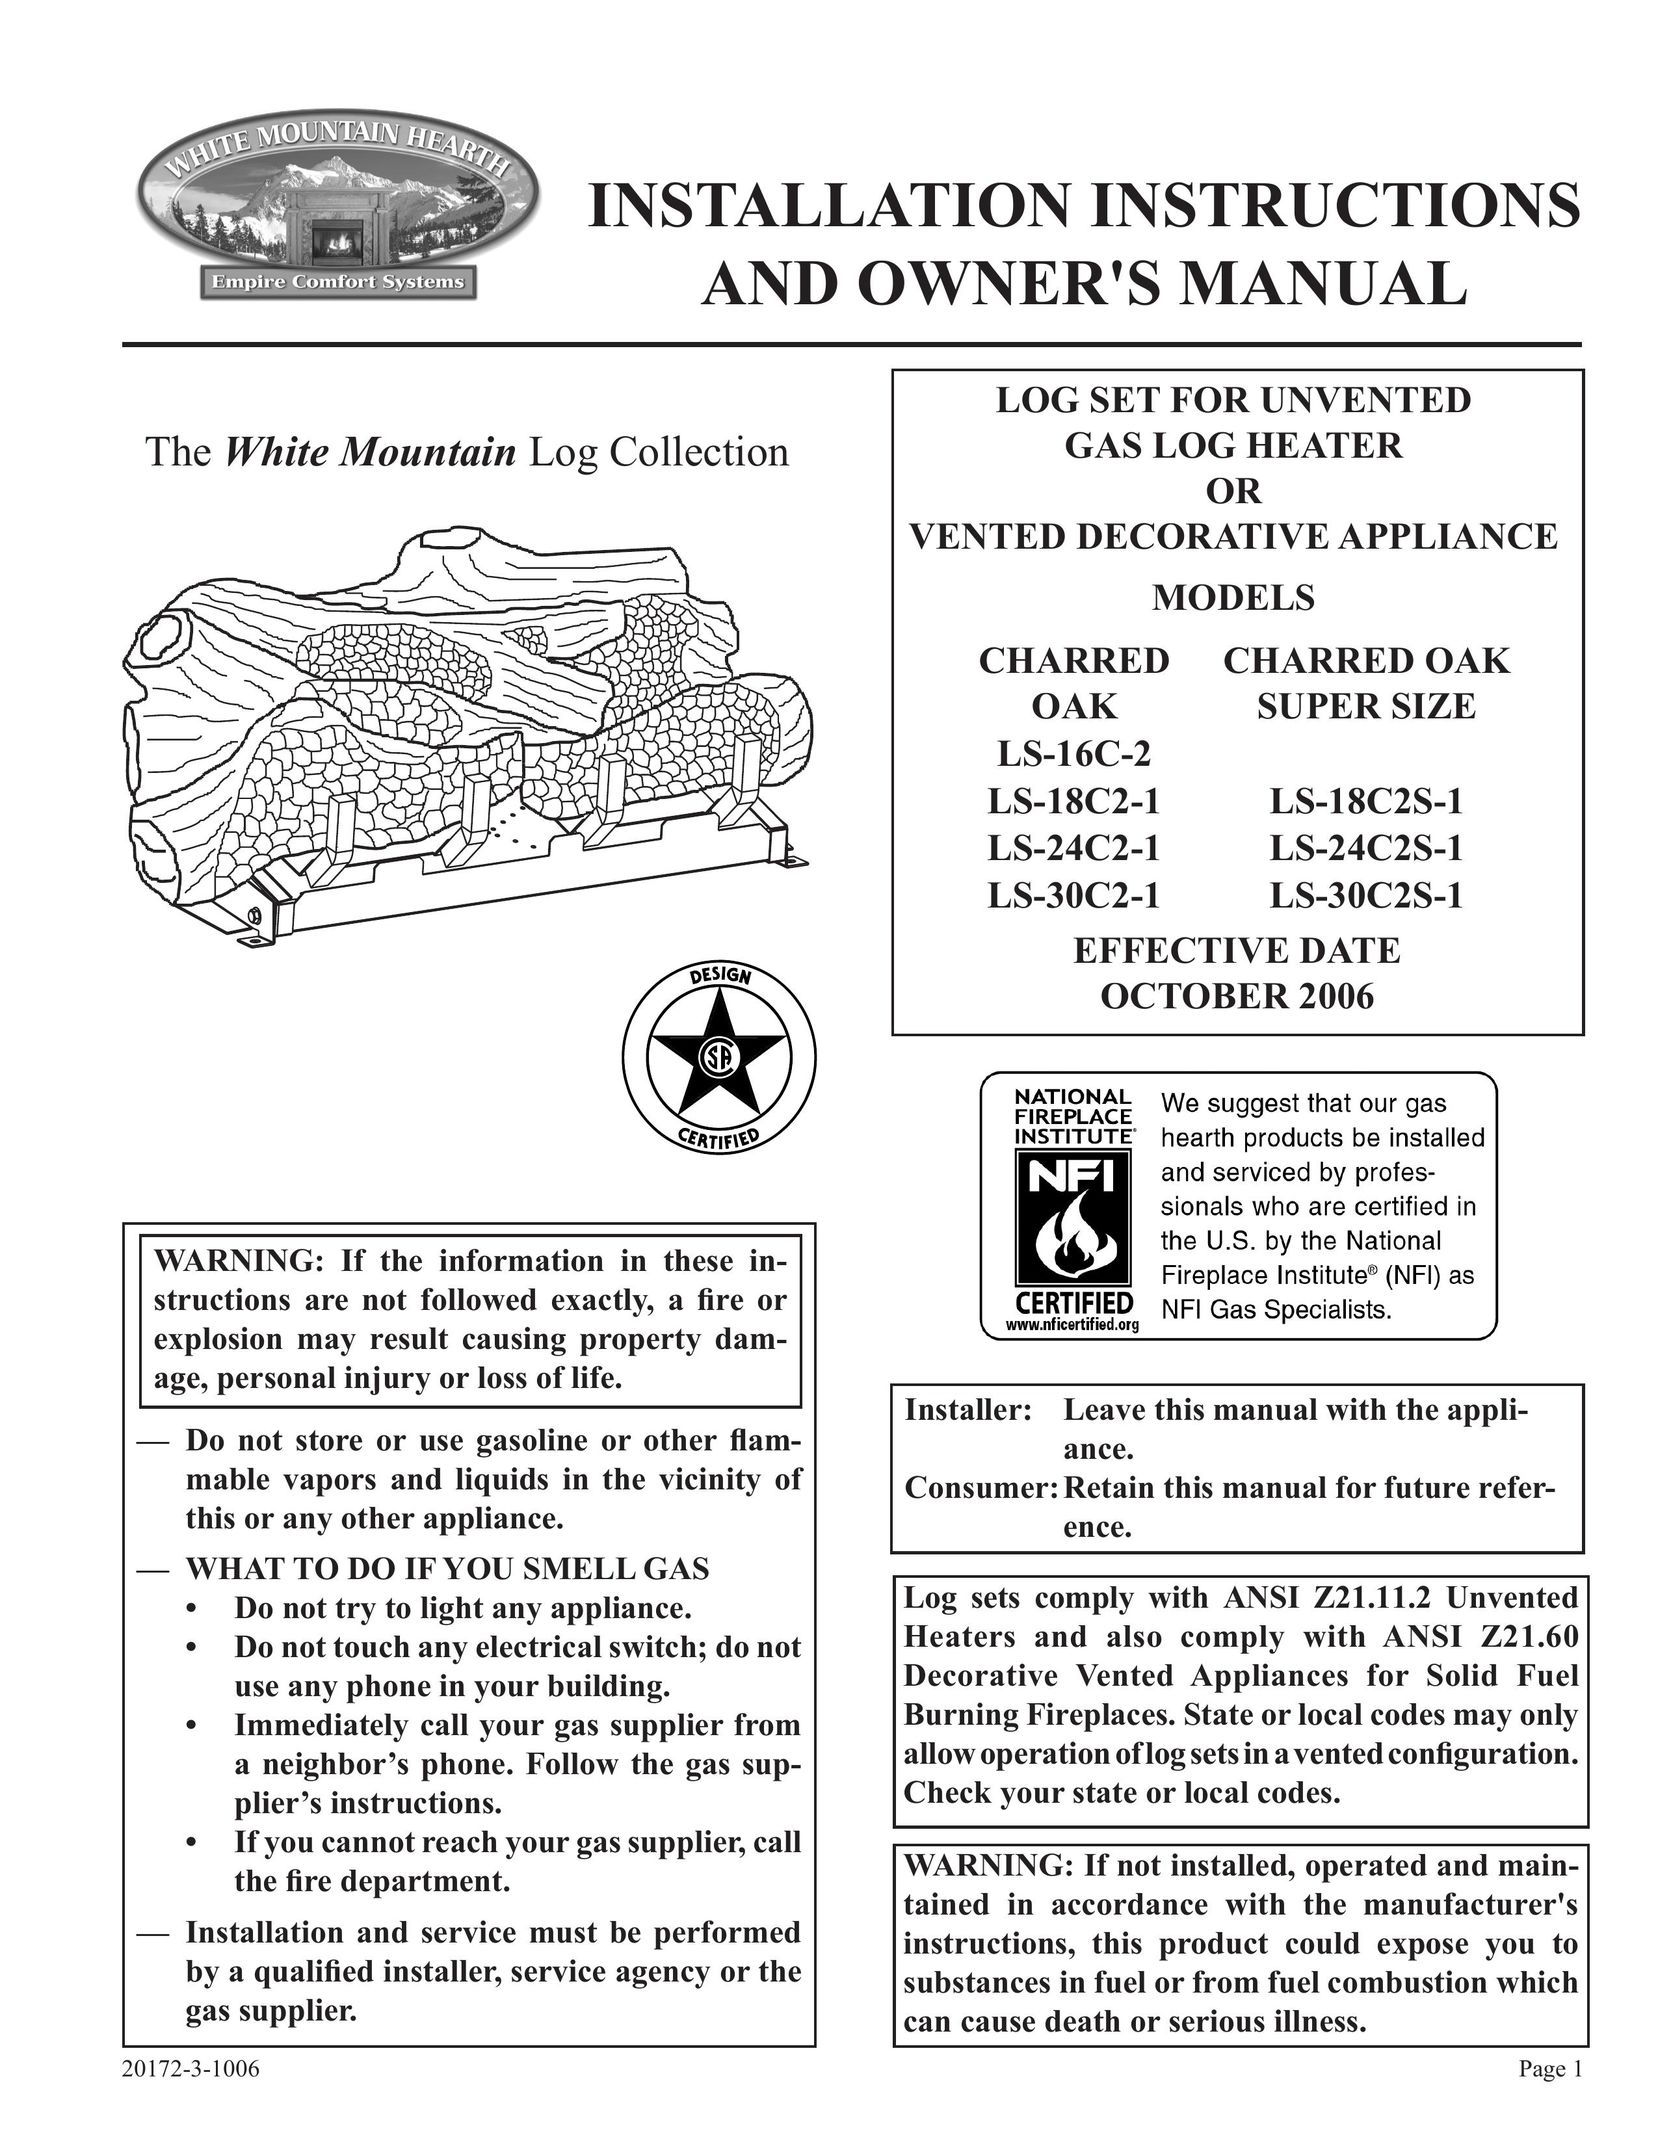 Empire Comfort Systems LS-30C2-1 Gas Heater User Manual